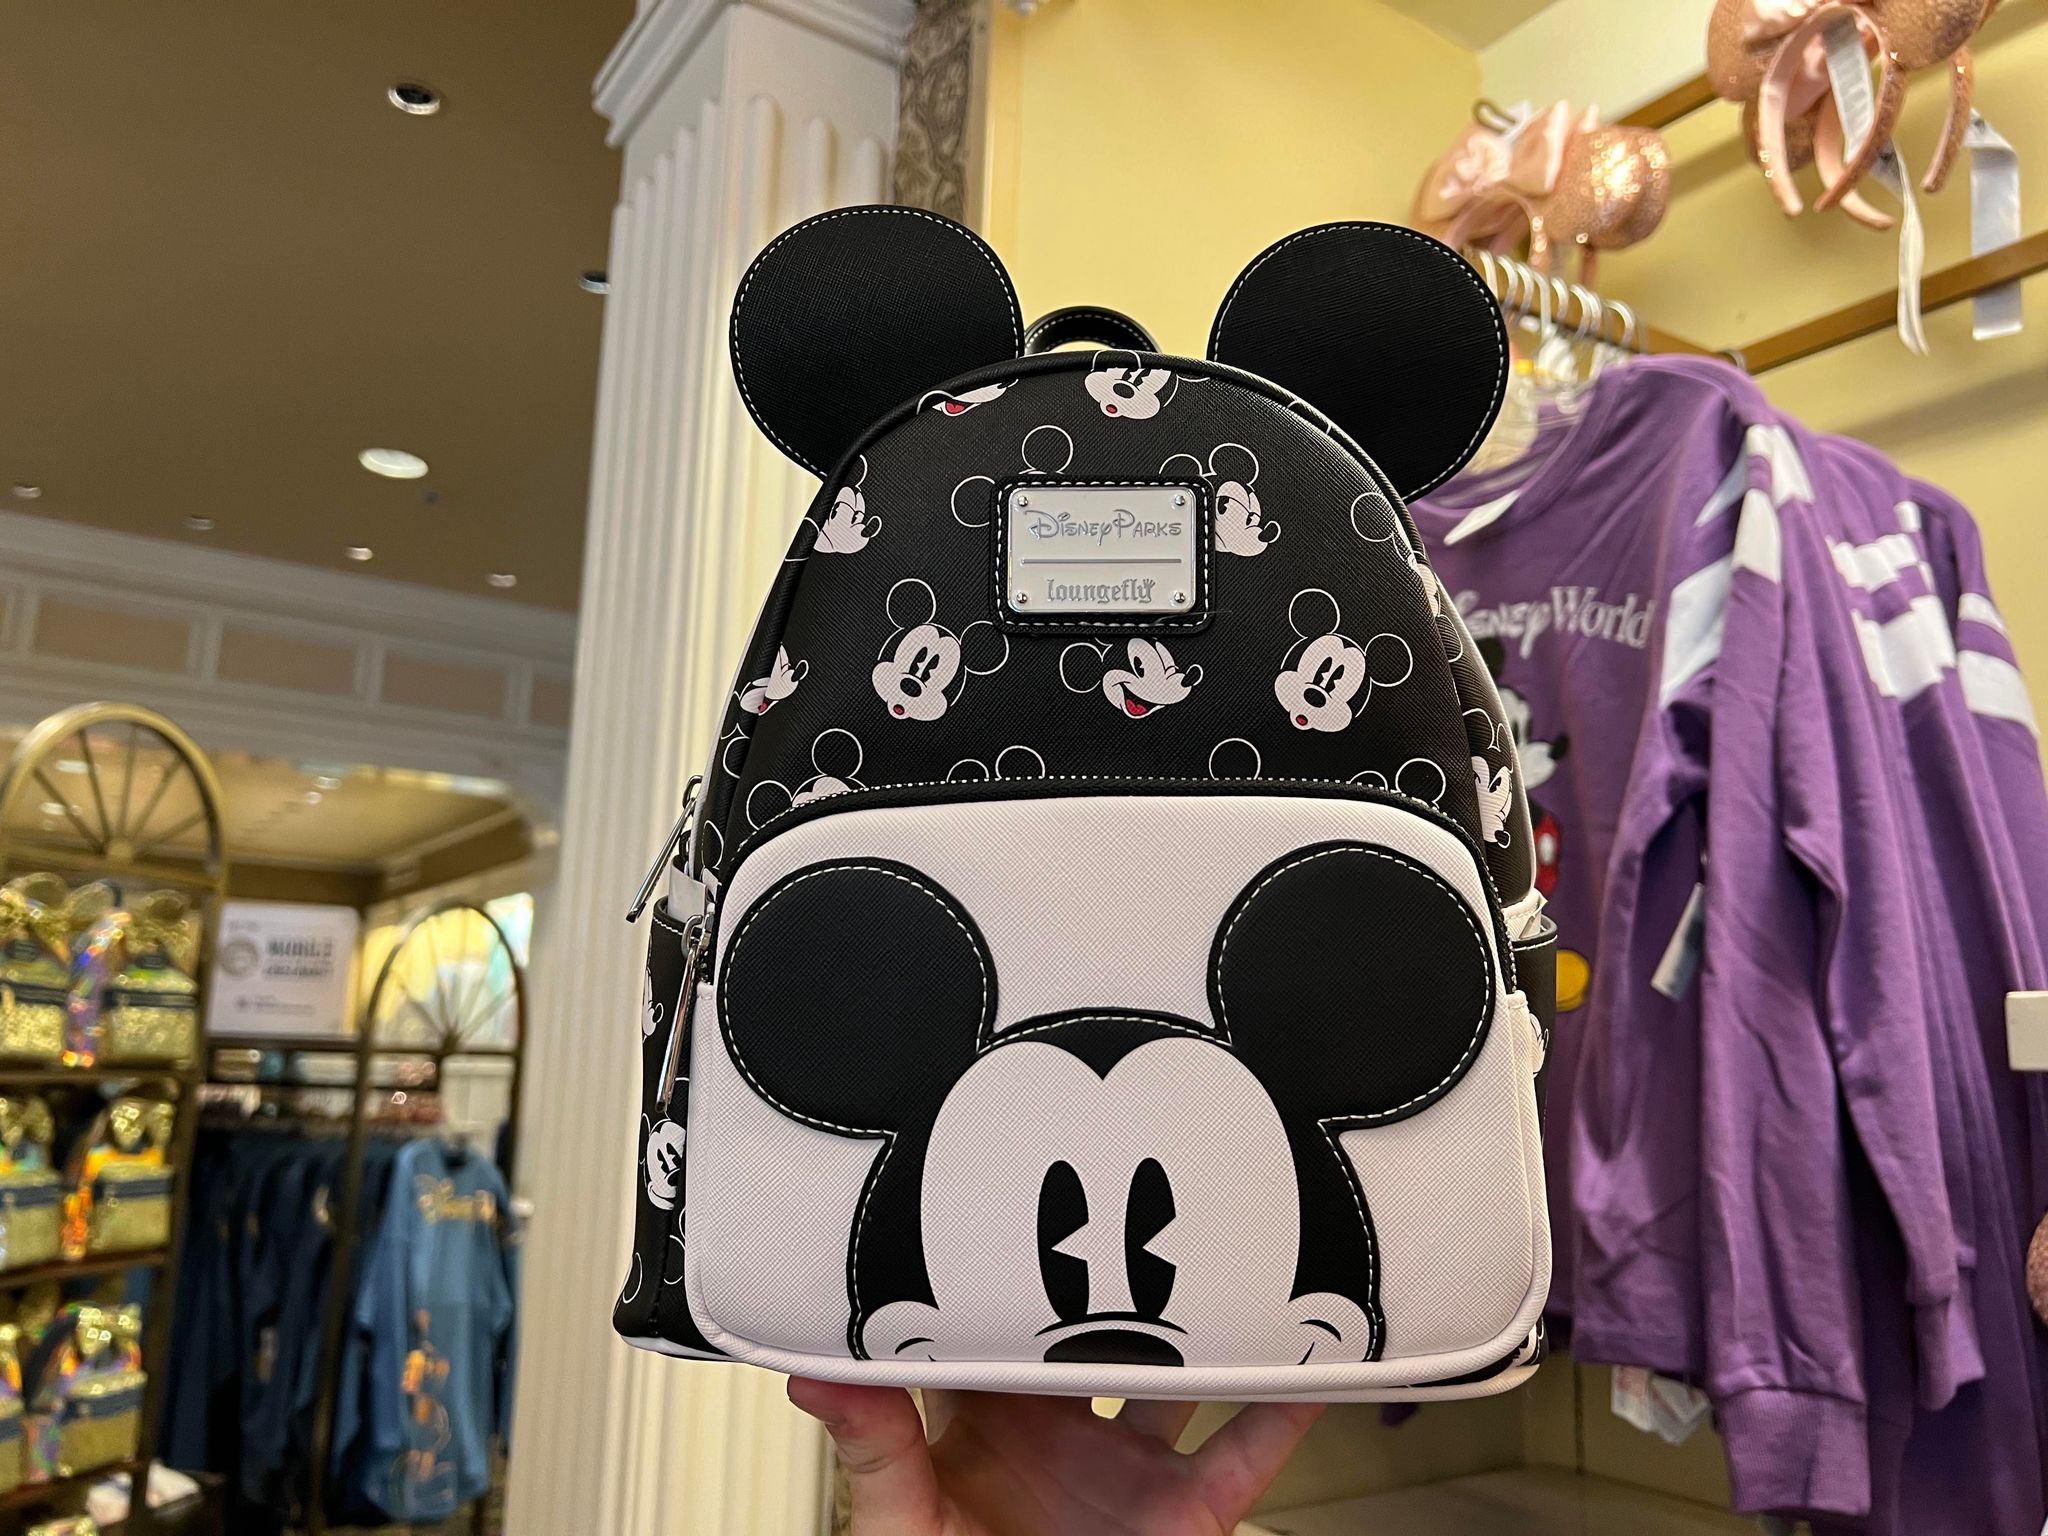 New Mickey Loungefly Bag at Emporium in the Magic Kingdom - MickeyBlog.com